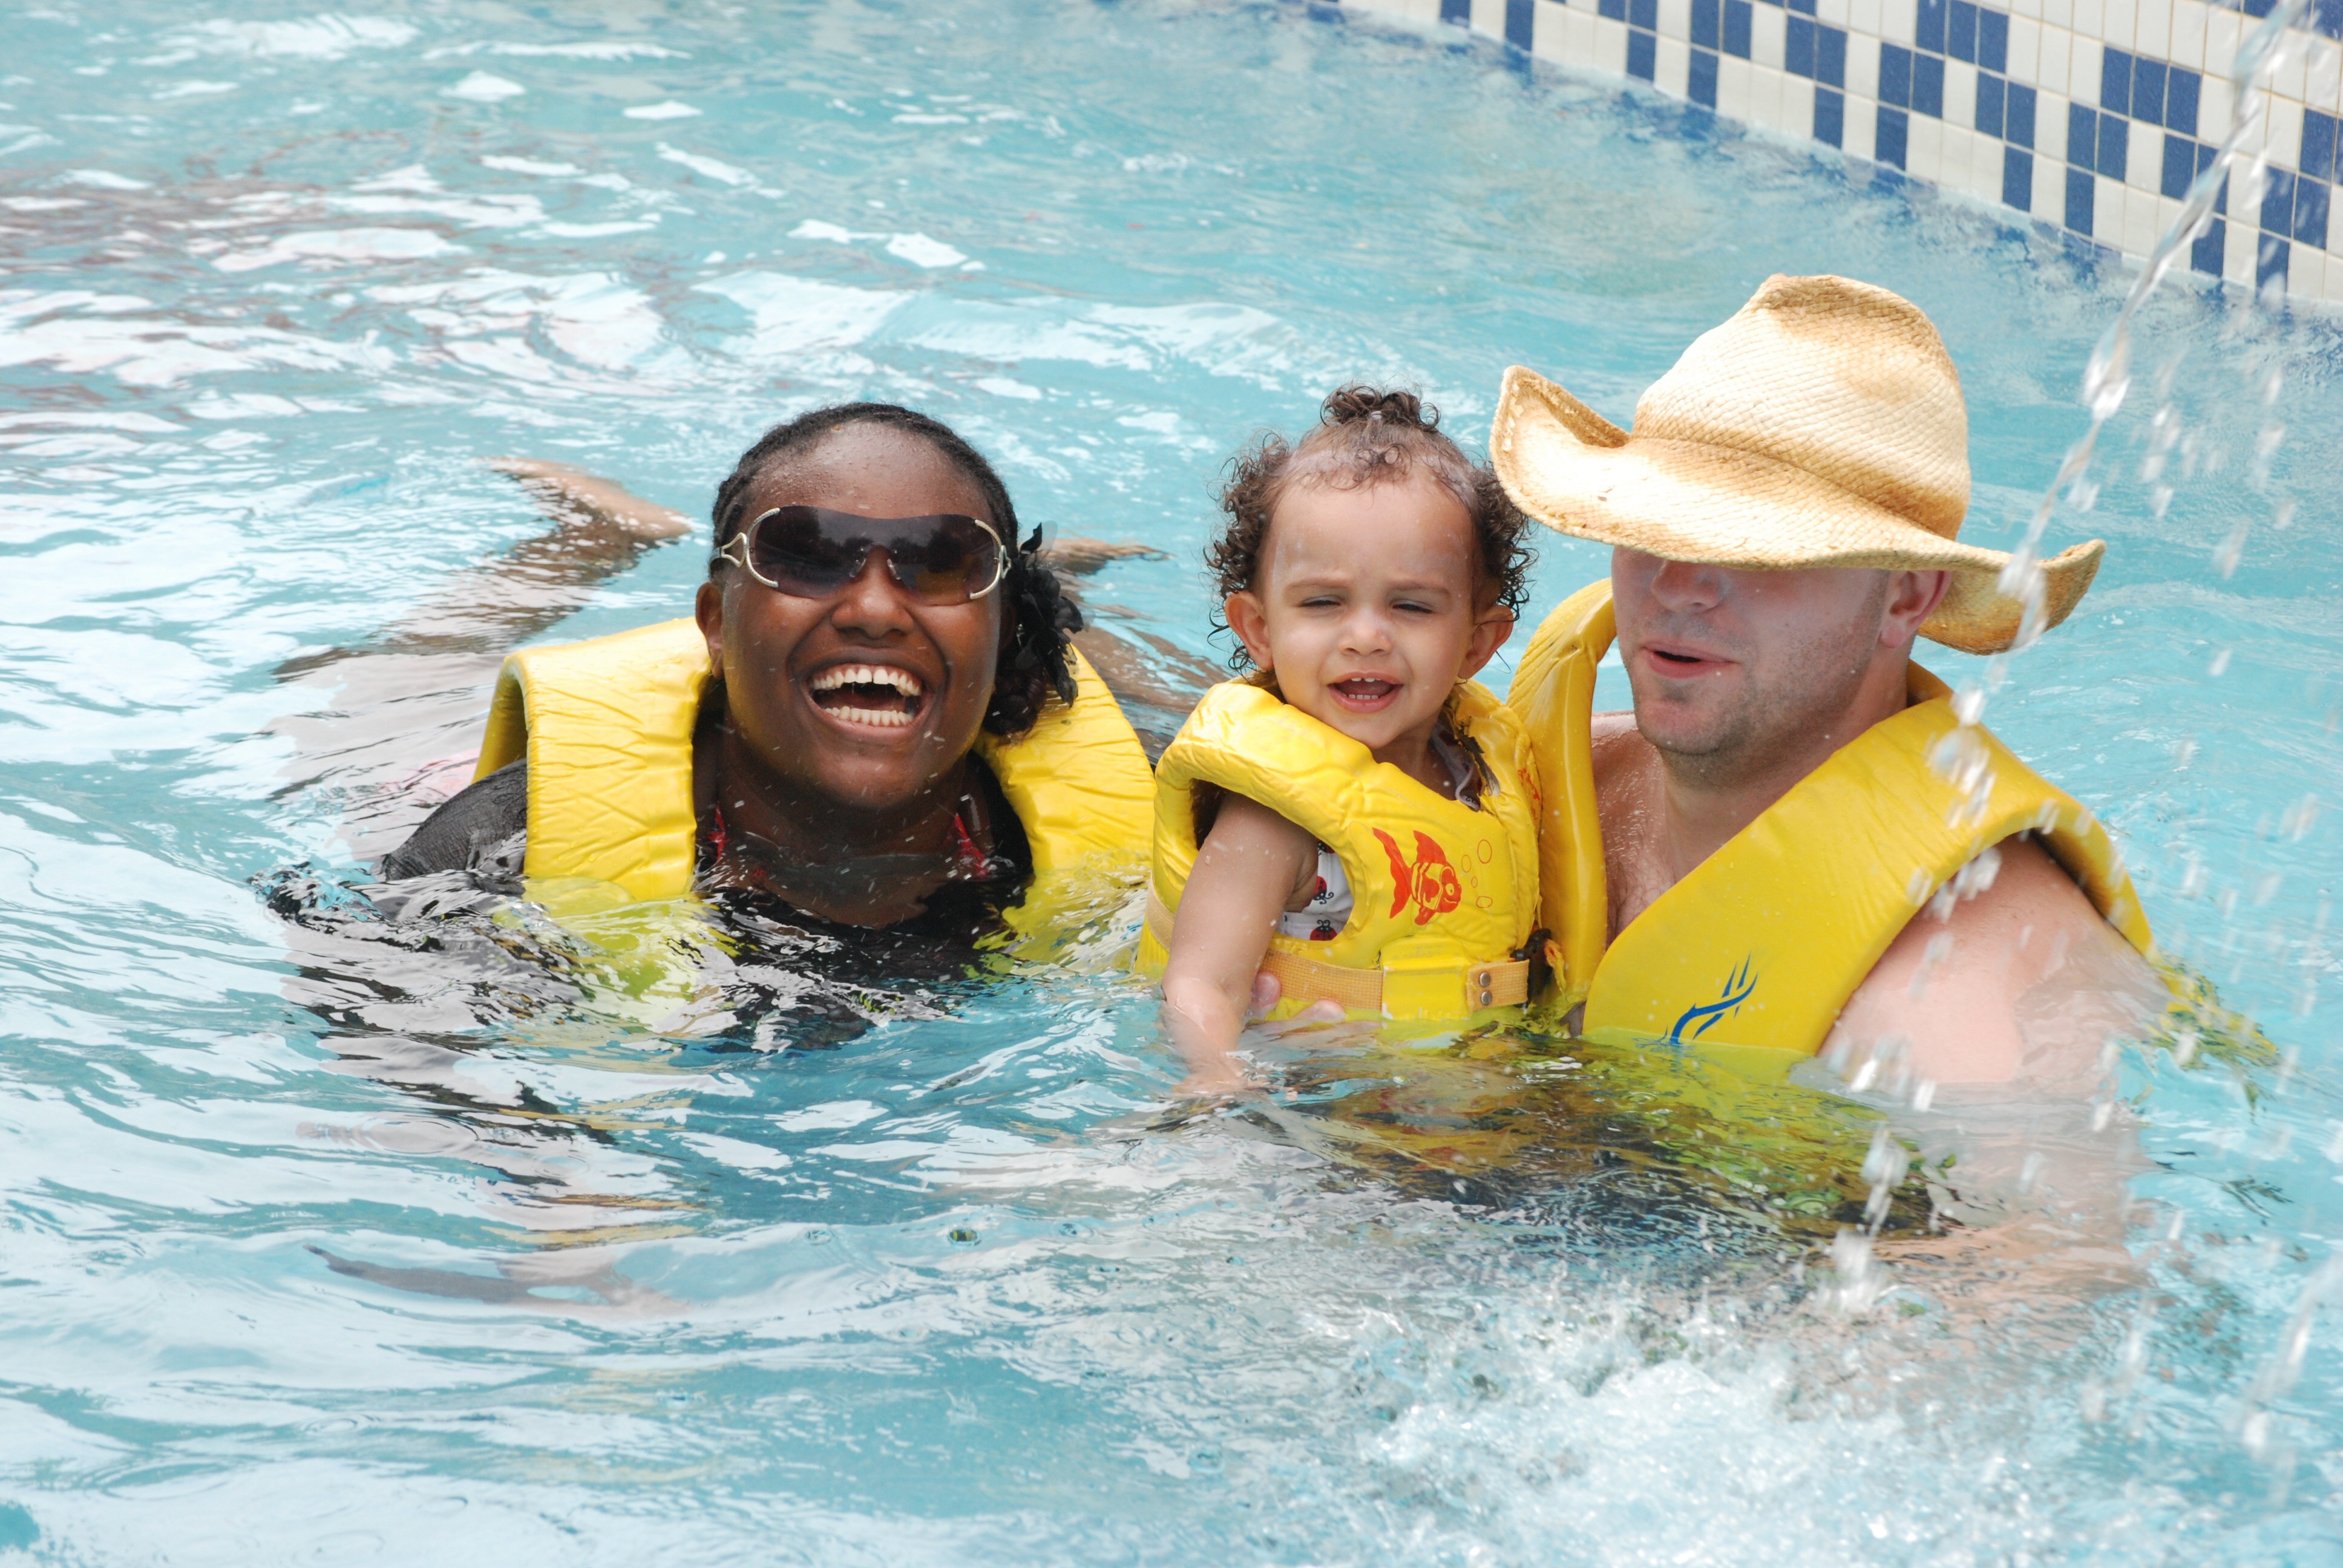 Free photo: In the pool - Child, Jacket, Life - Free Download - Jooinn